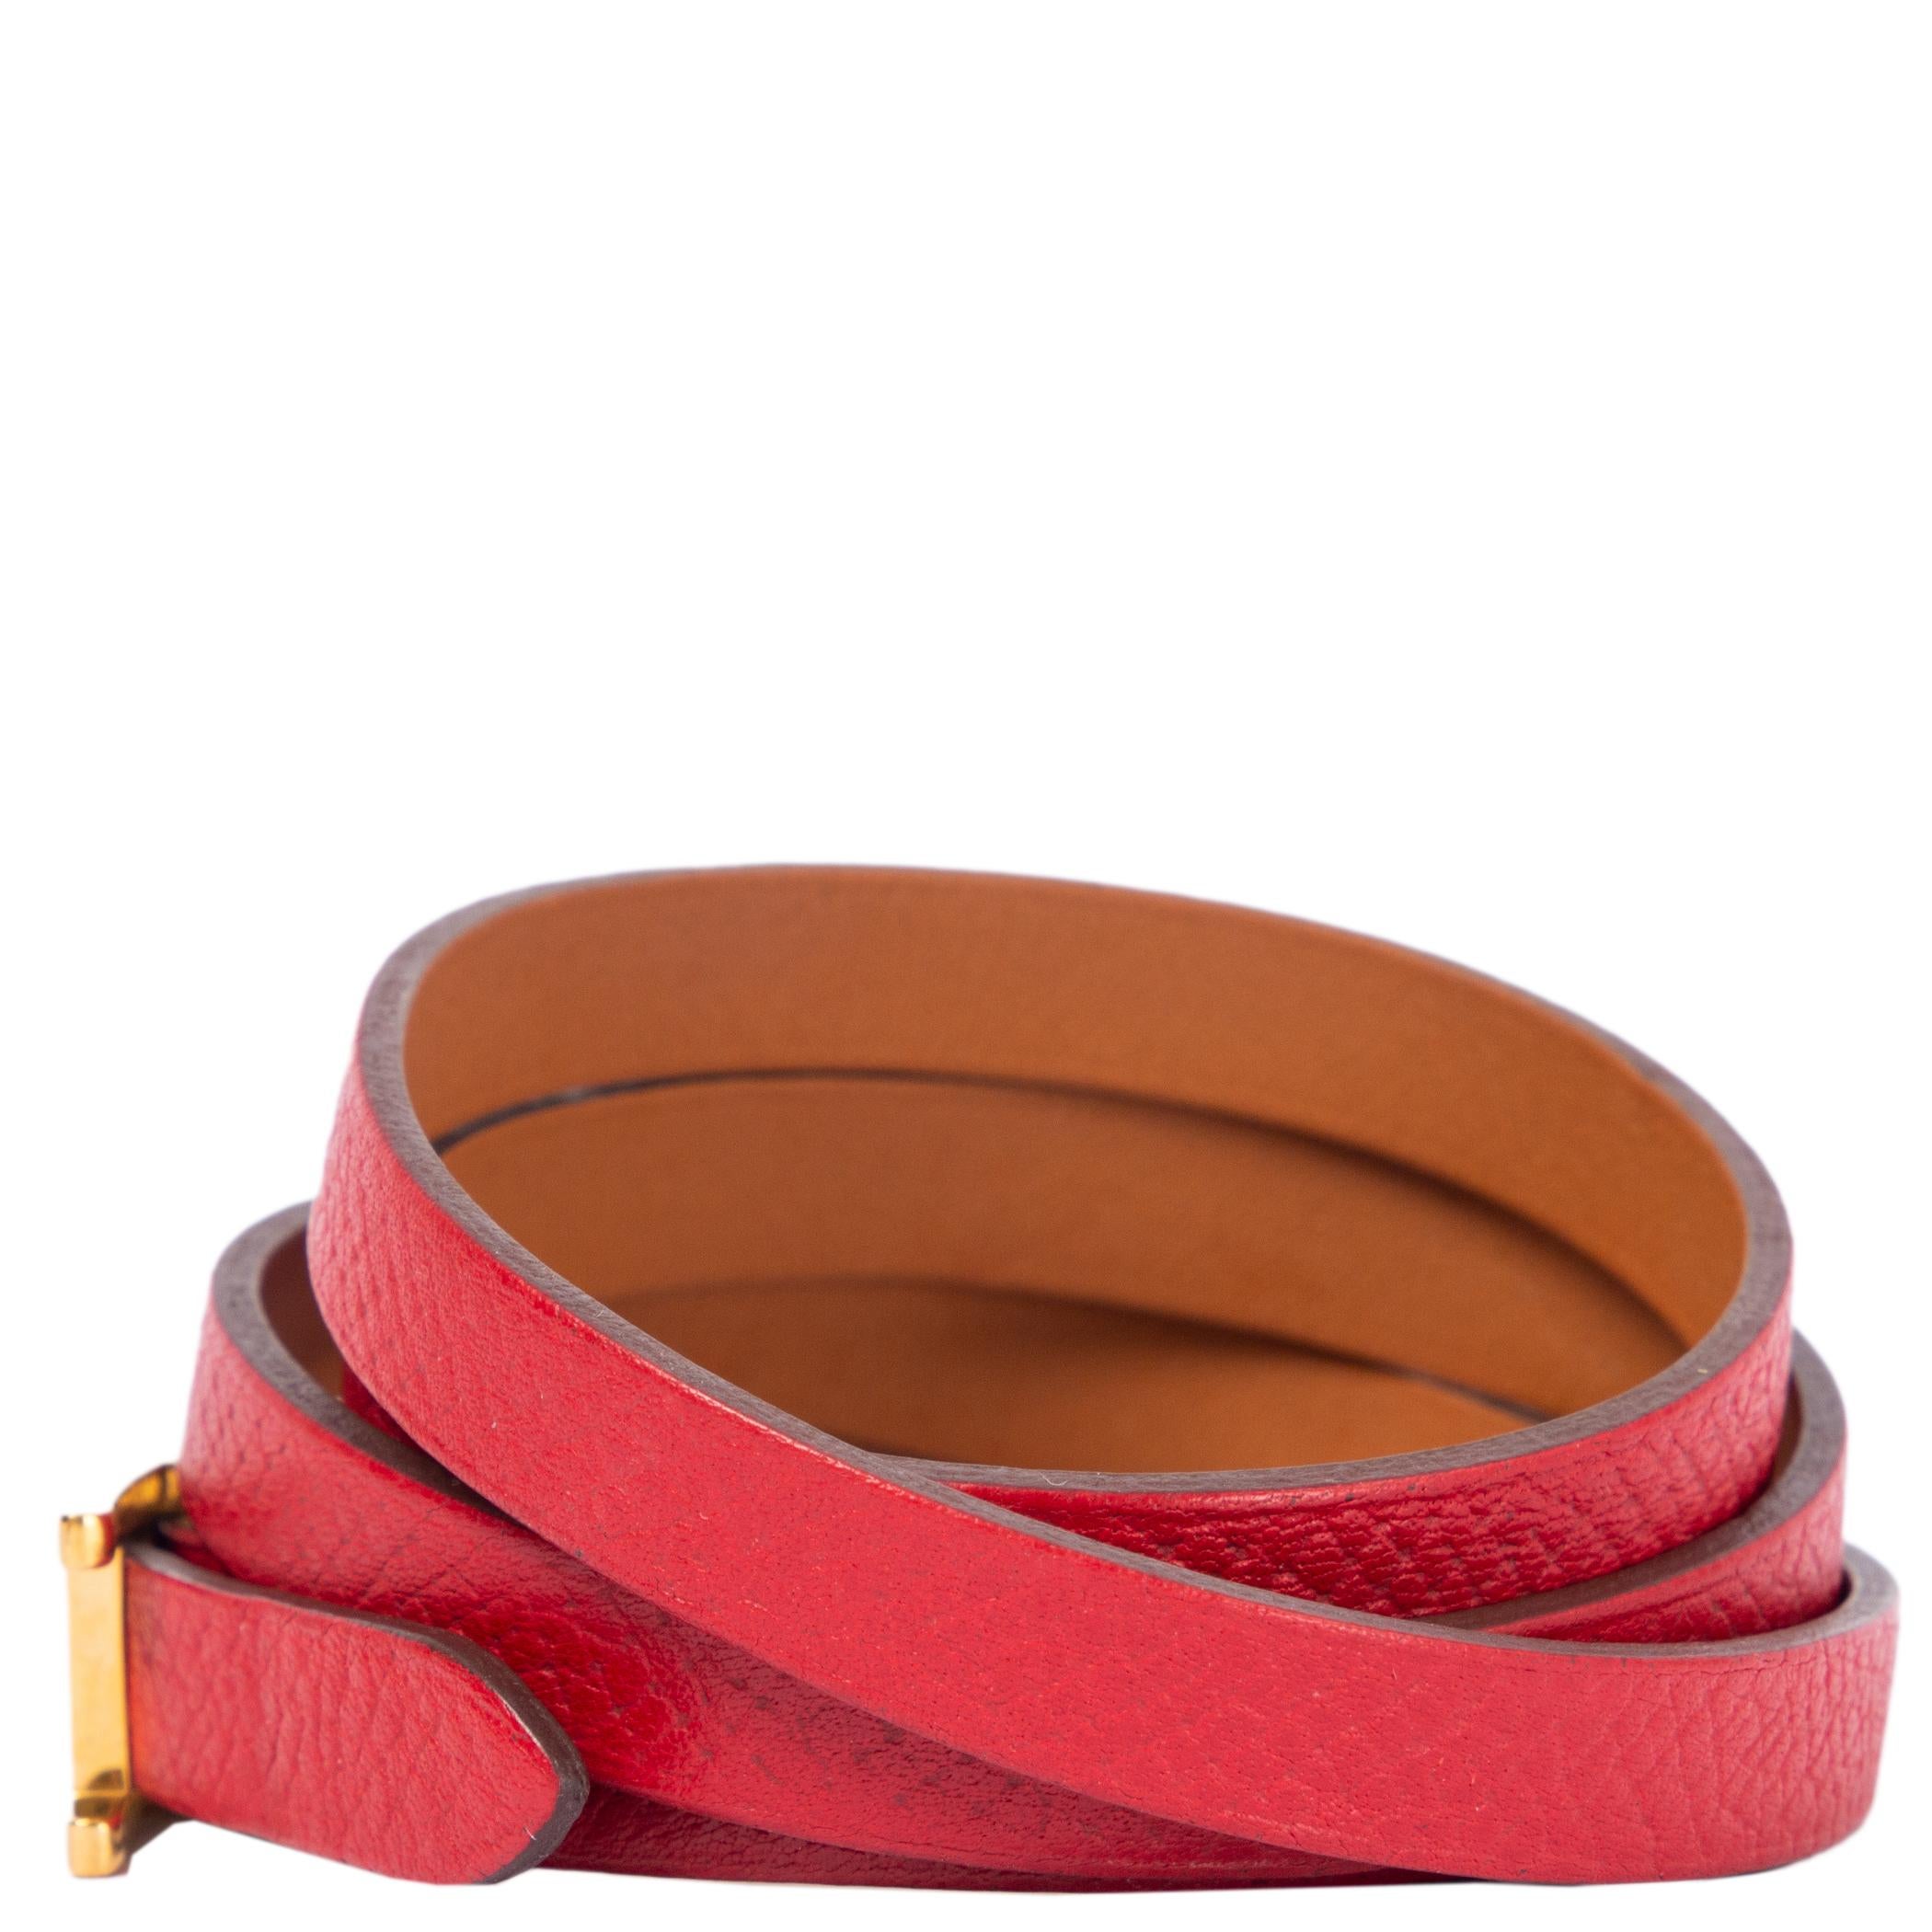 100% authentic Hermès Hapi 3 Bracelet in size S. The bracelet is a long strap of Rouge Tomate Epsom calfskin leather that wraps around the wrist three times and closes with a gold-plated Hermès H buckle. Has been worn and is in excellent